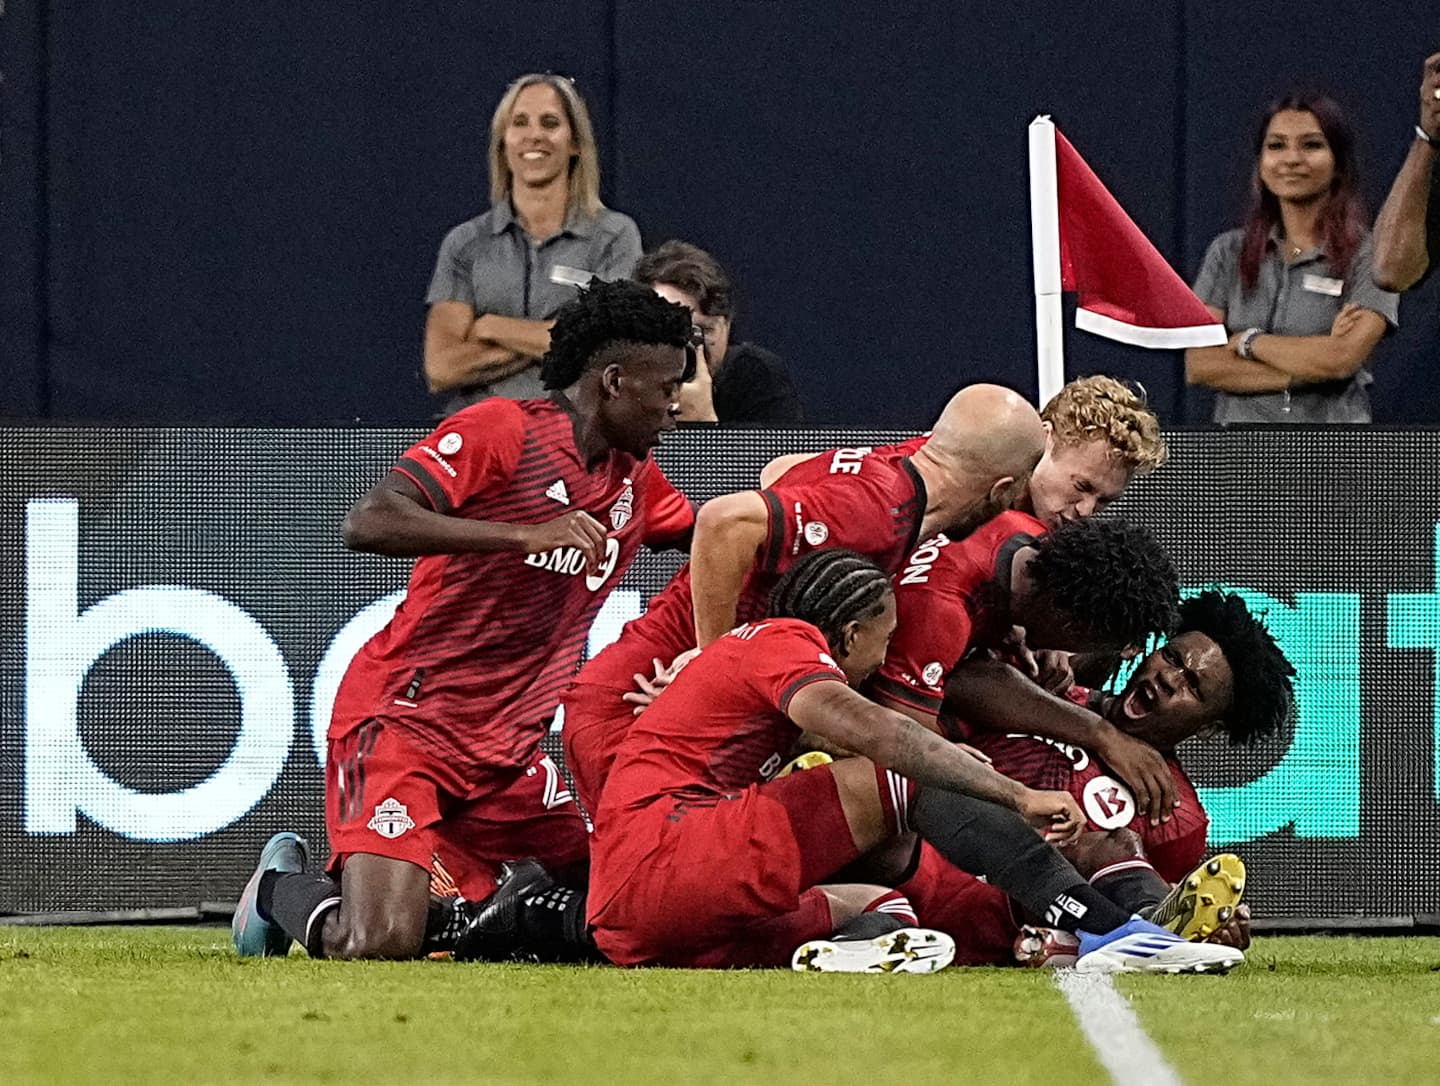 A bit of positive for Toronto FC